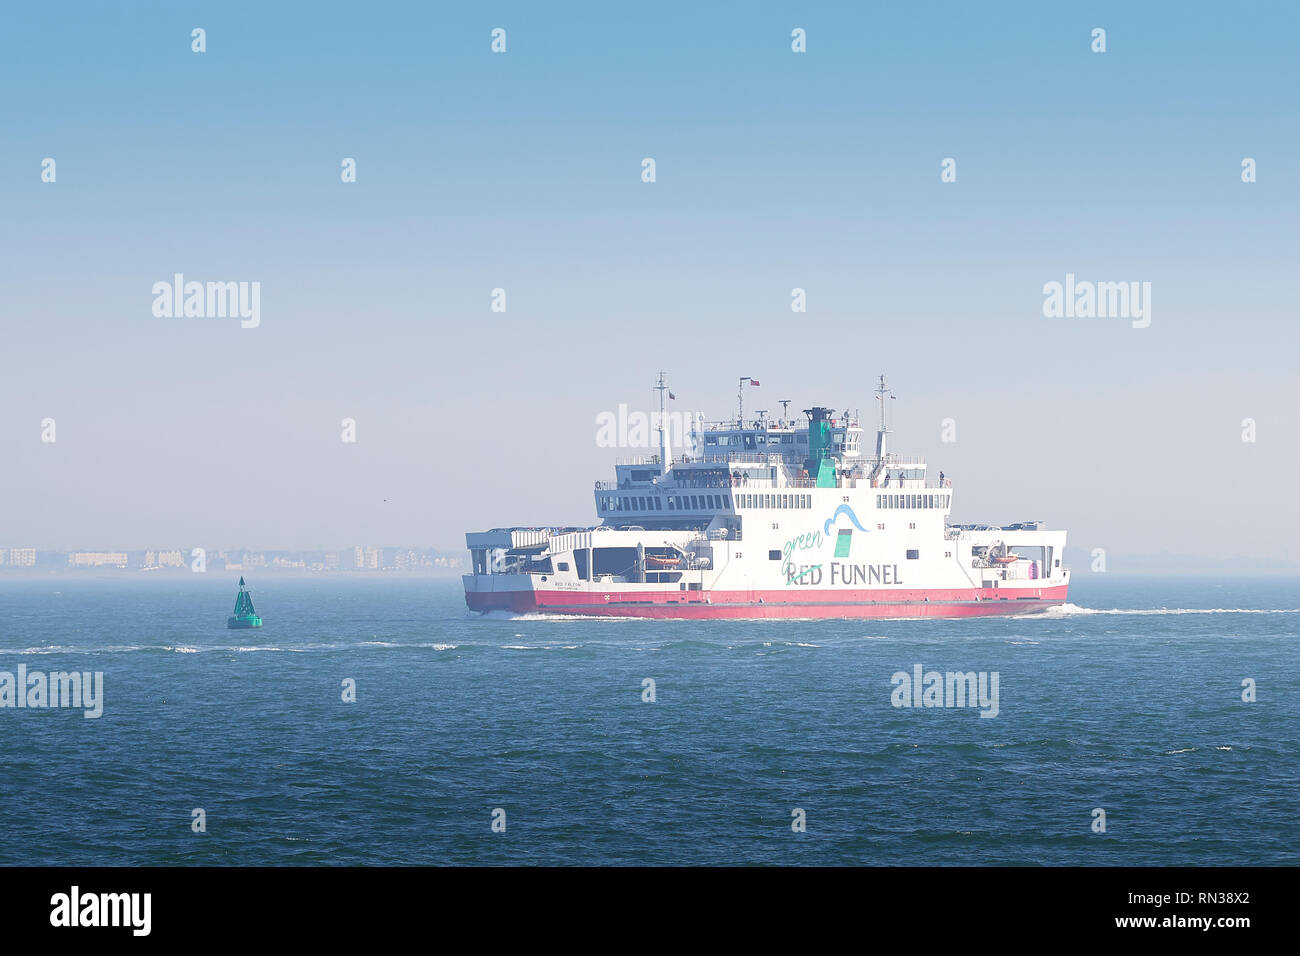 The Red Funnel Ferries, Vehicle Ferry (Car Ferry), MV RED FALCON, Enroute From The Isle Of Wight To The Port Of Southampton, UK. February 2019. Stock Photo